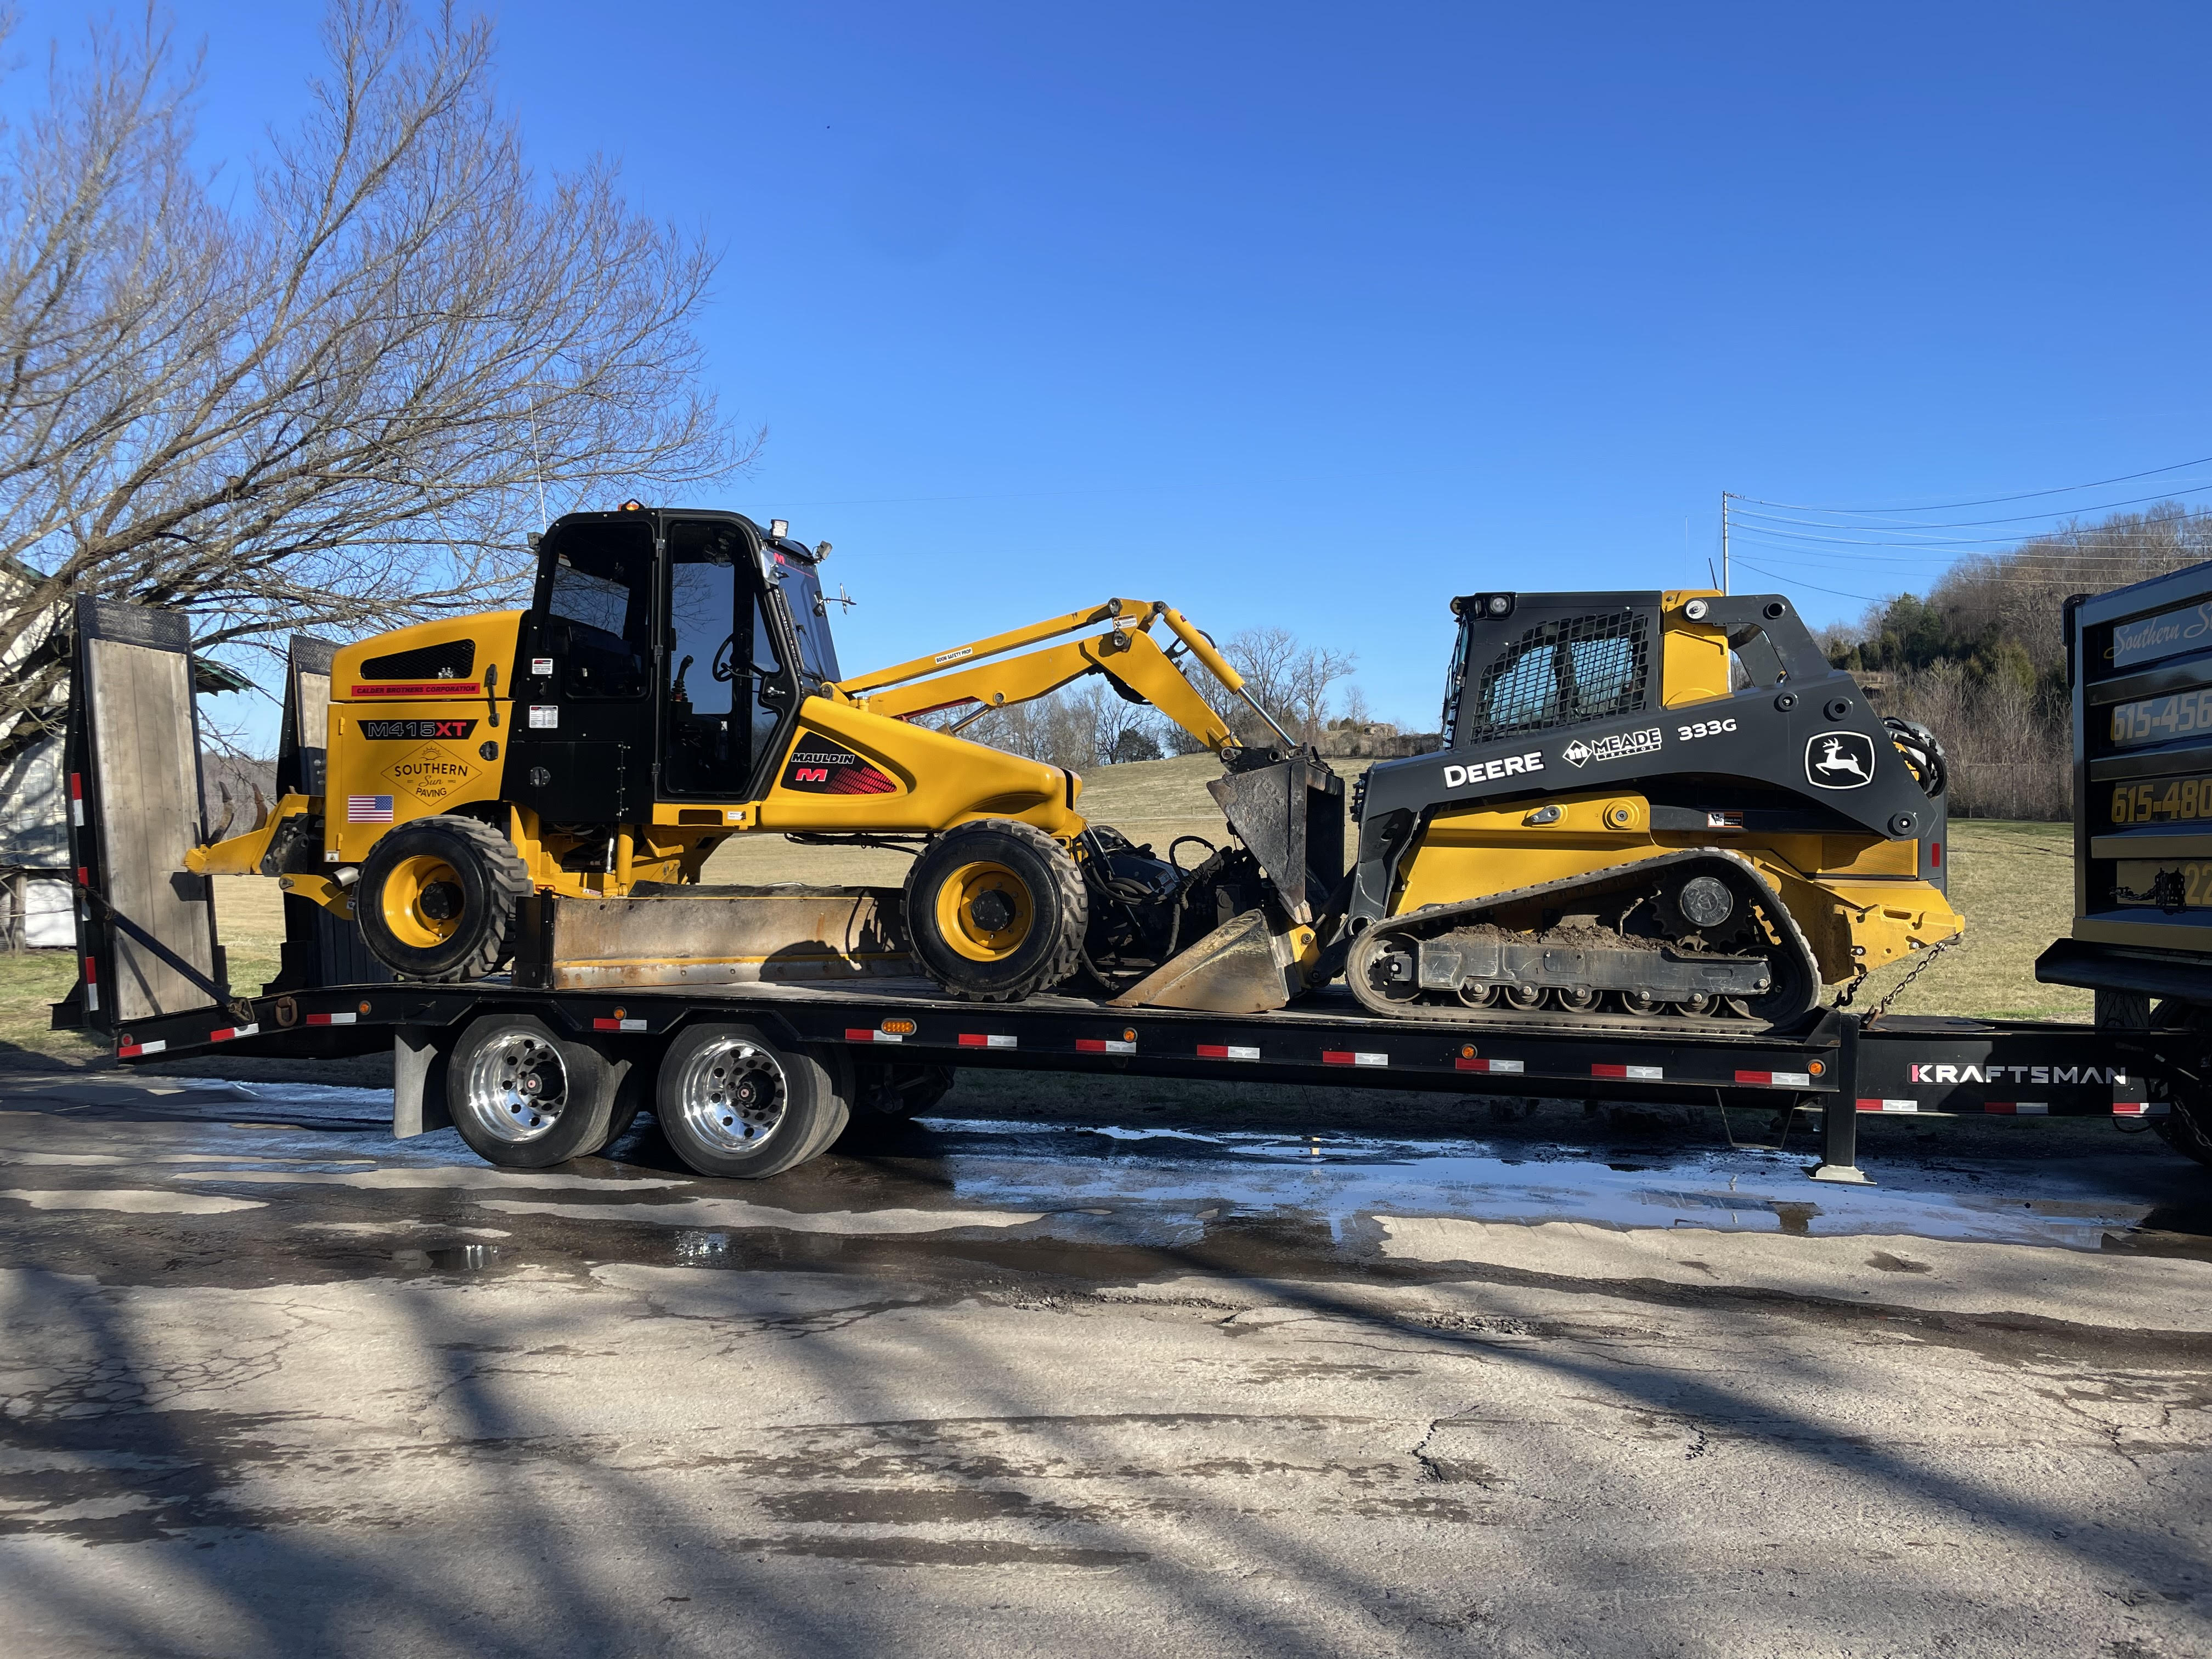 Kraftsman HP40 with paving equipment and southern sun